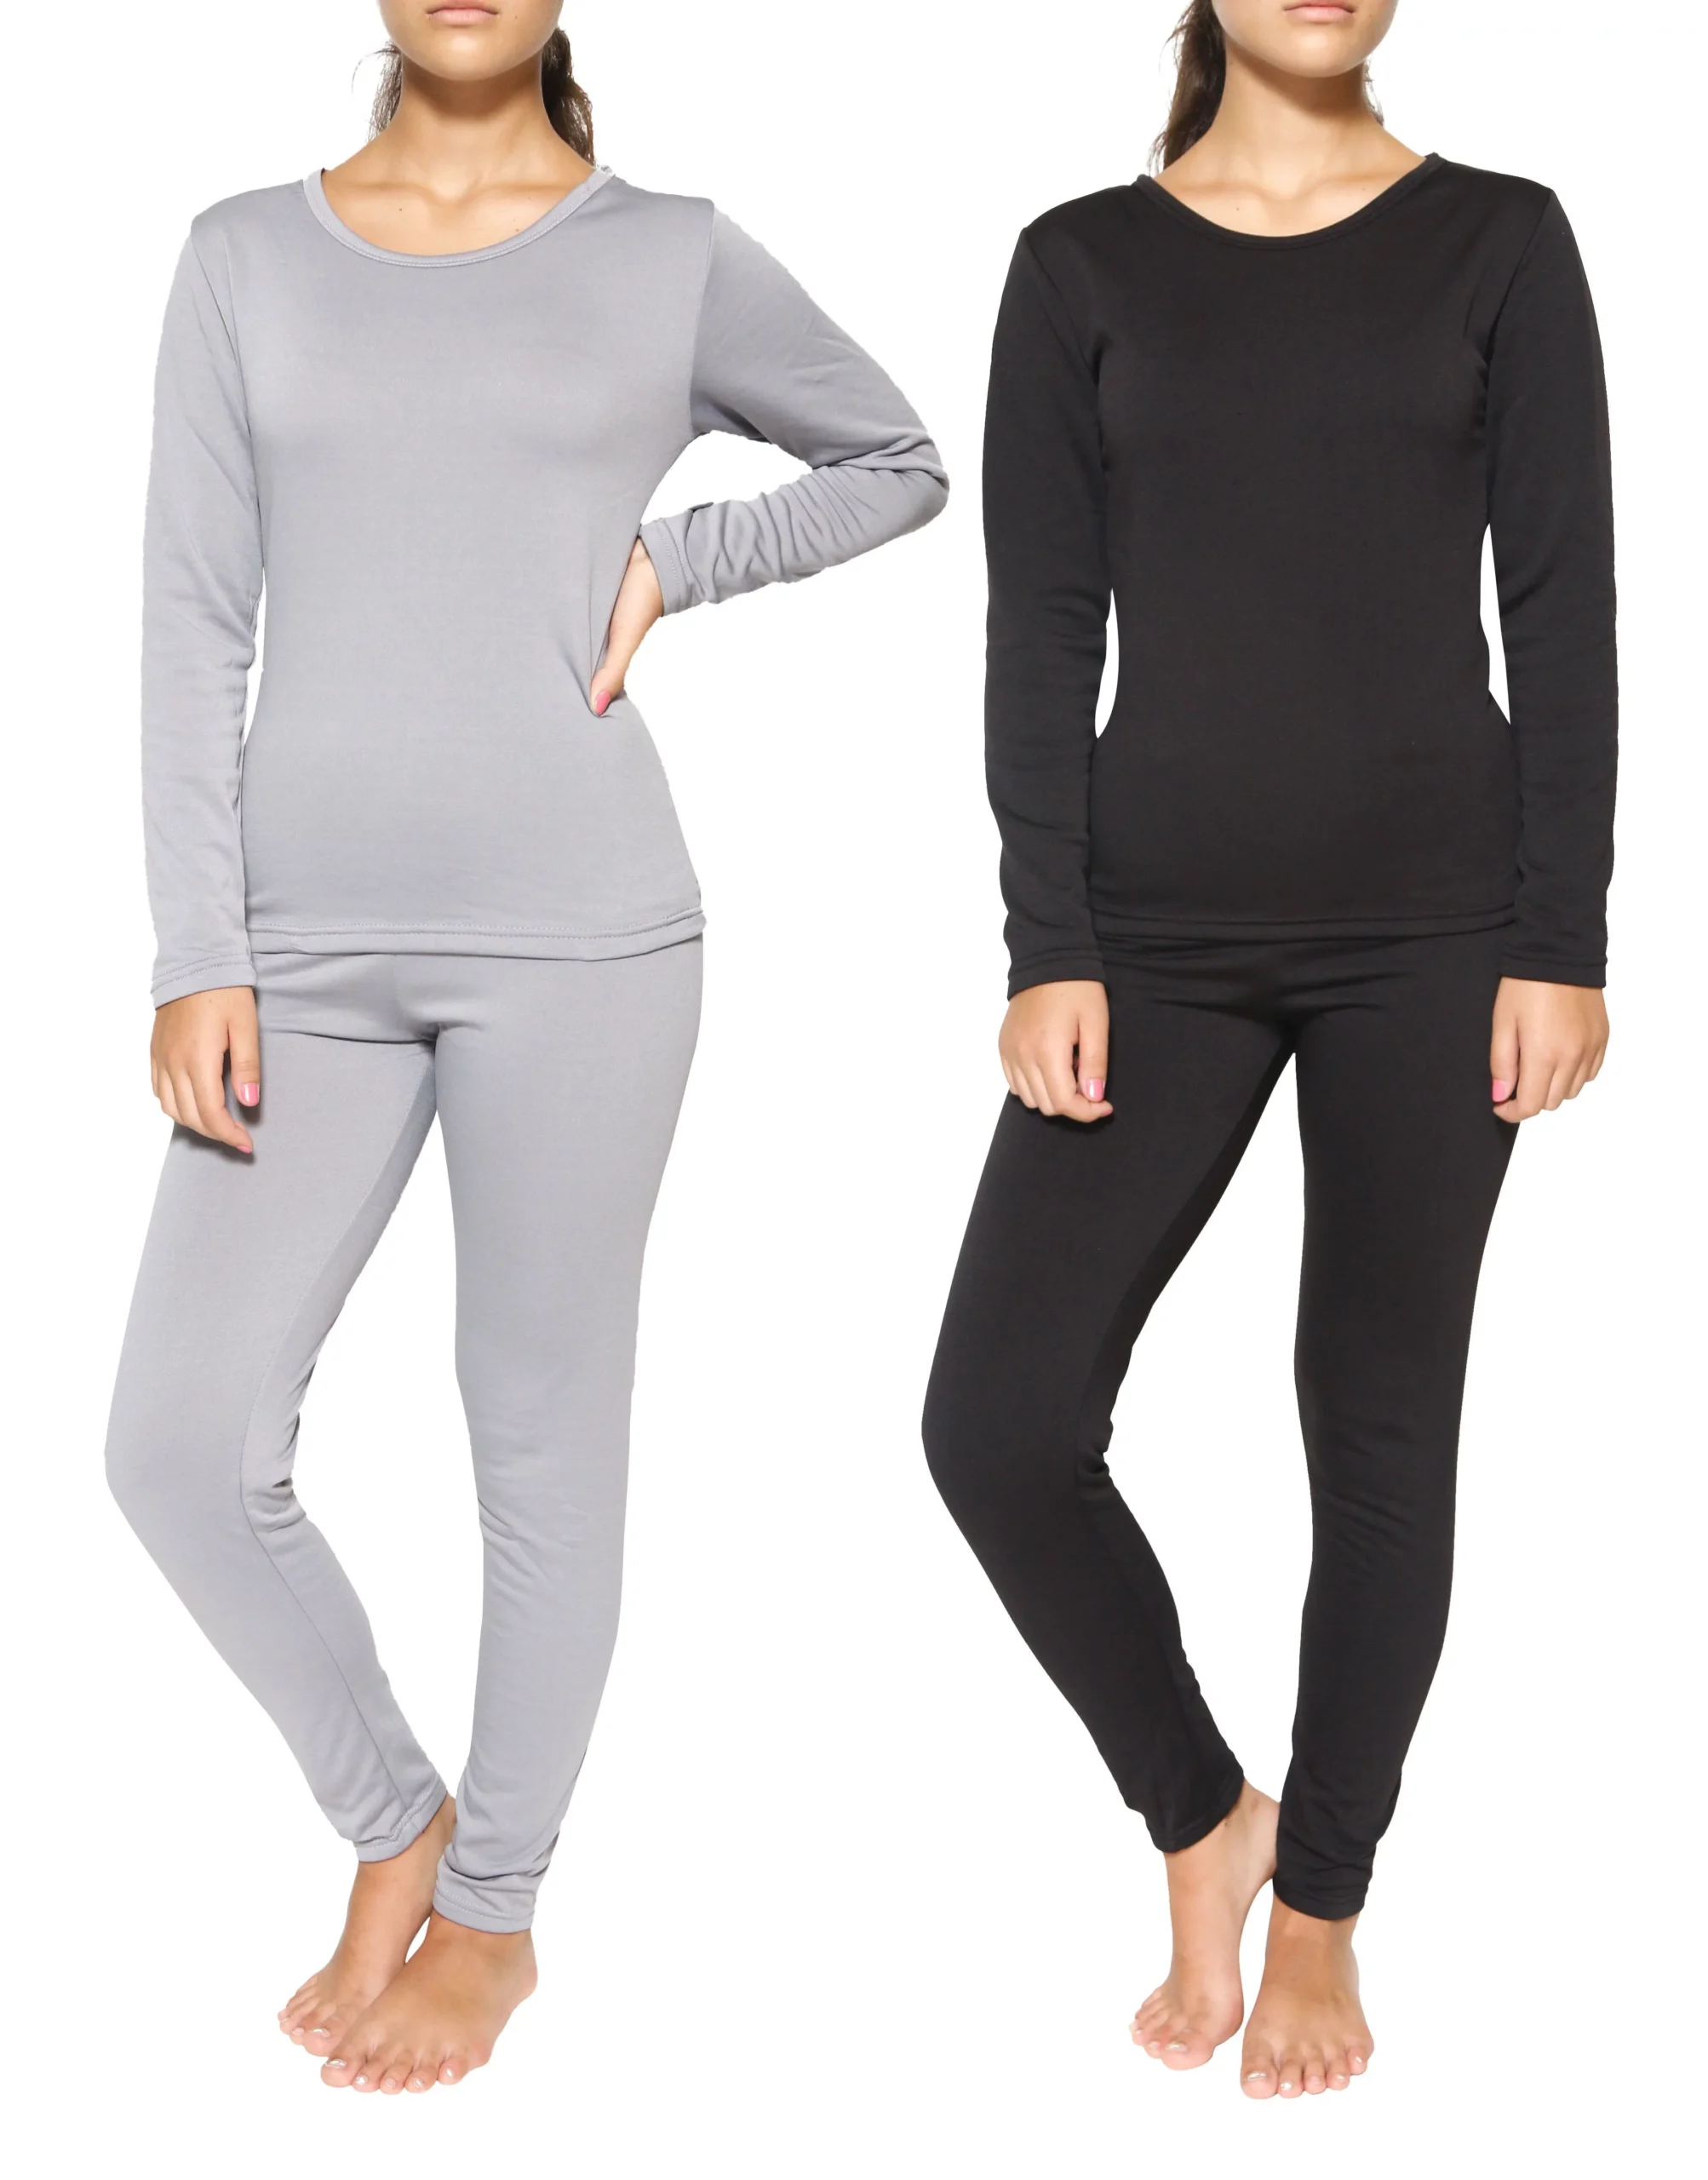 Buy thermals at best price for extreme cold conditions